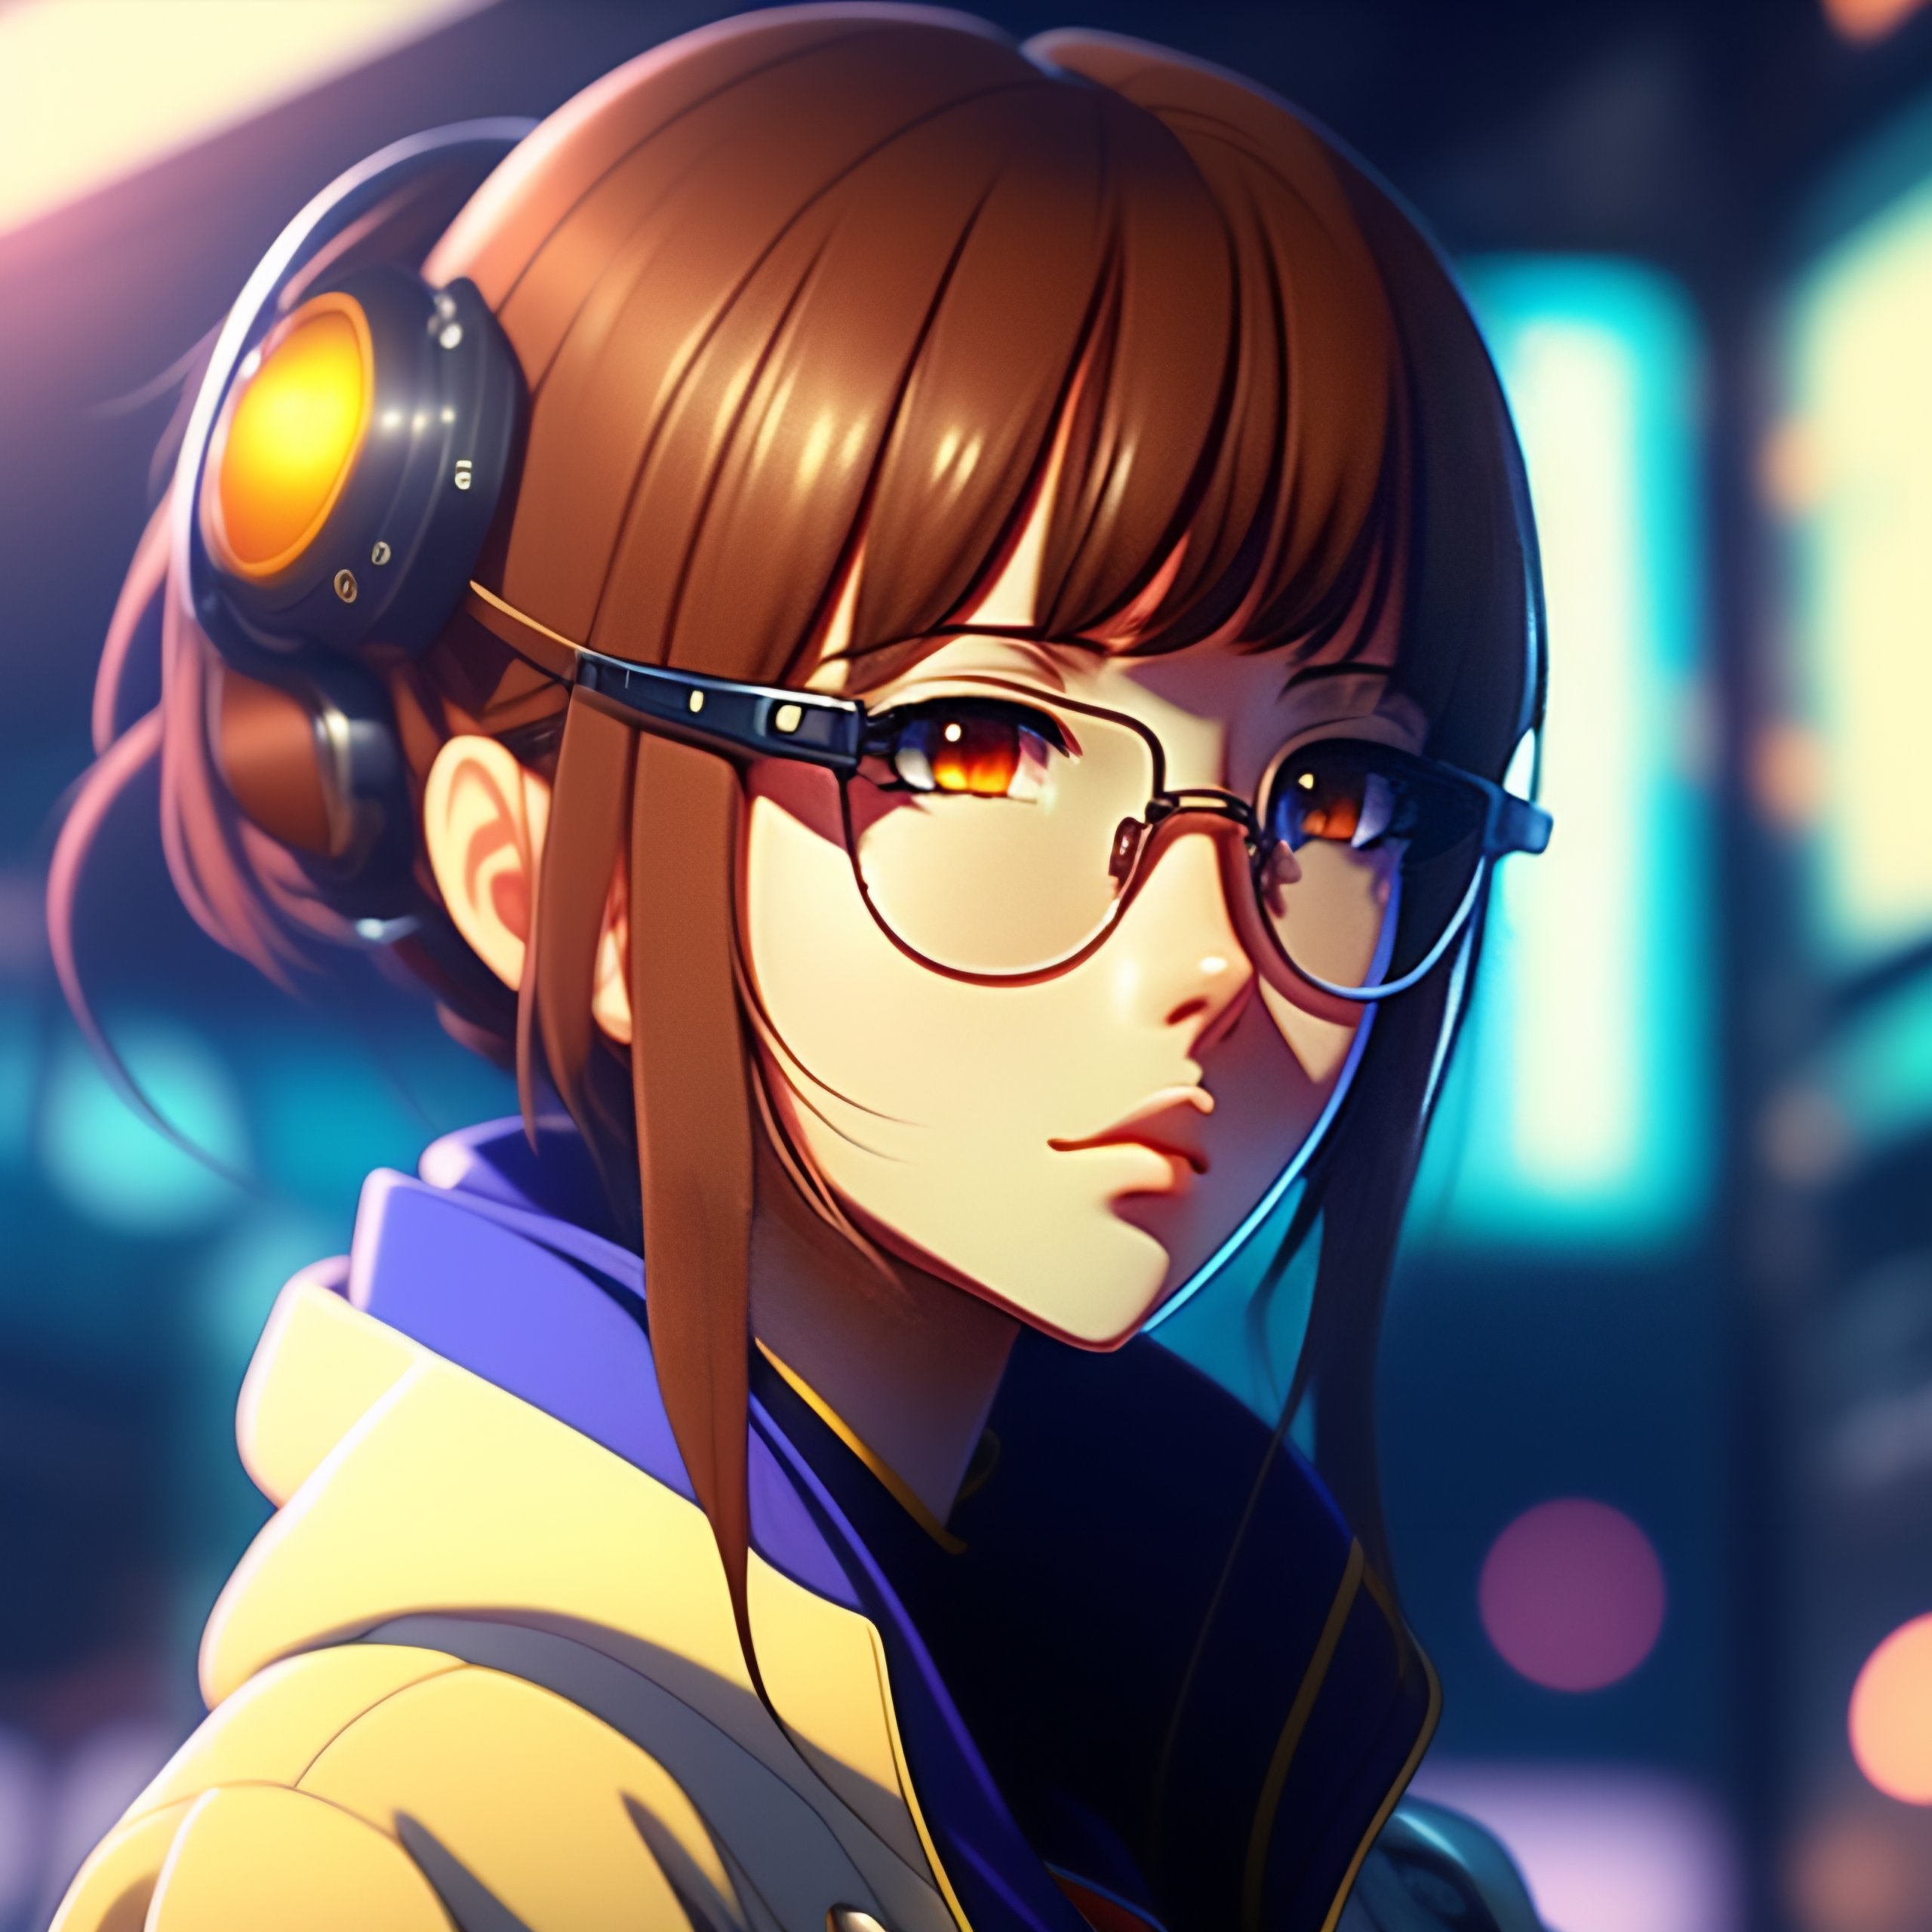 Lexica Anime Girl With Brown Hair And Brown Eyes And Round Glasses Cyberpunk Room Landscape 